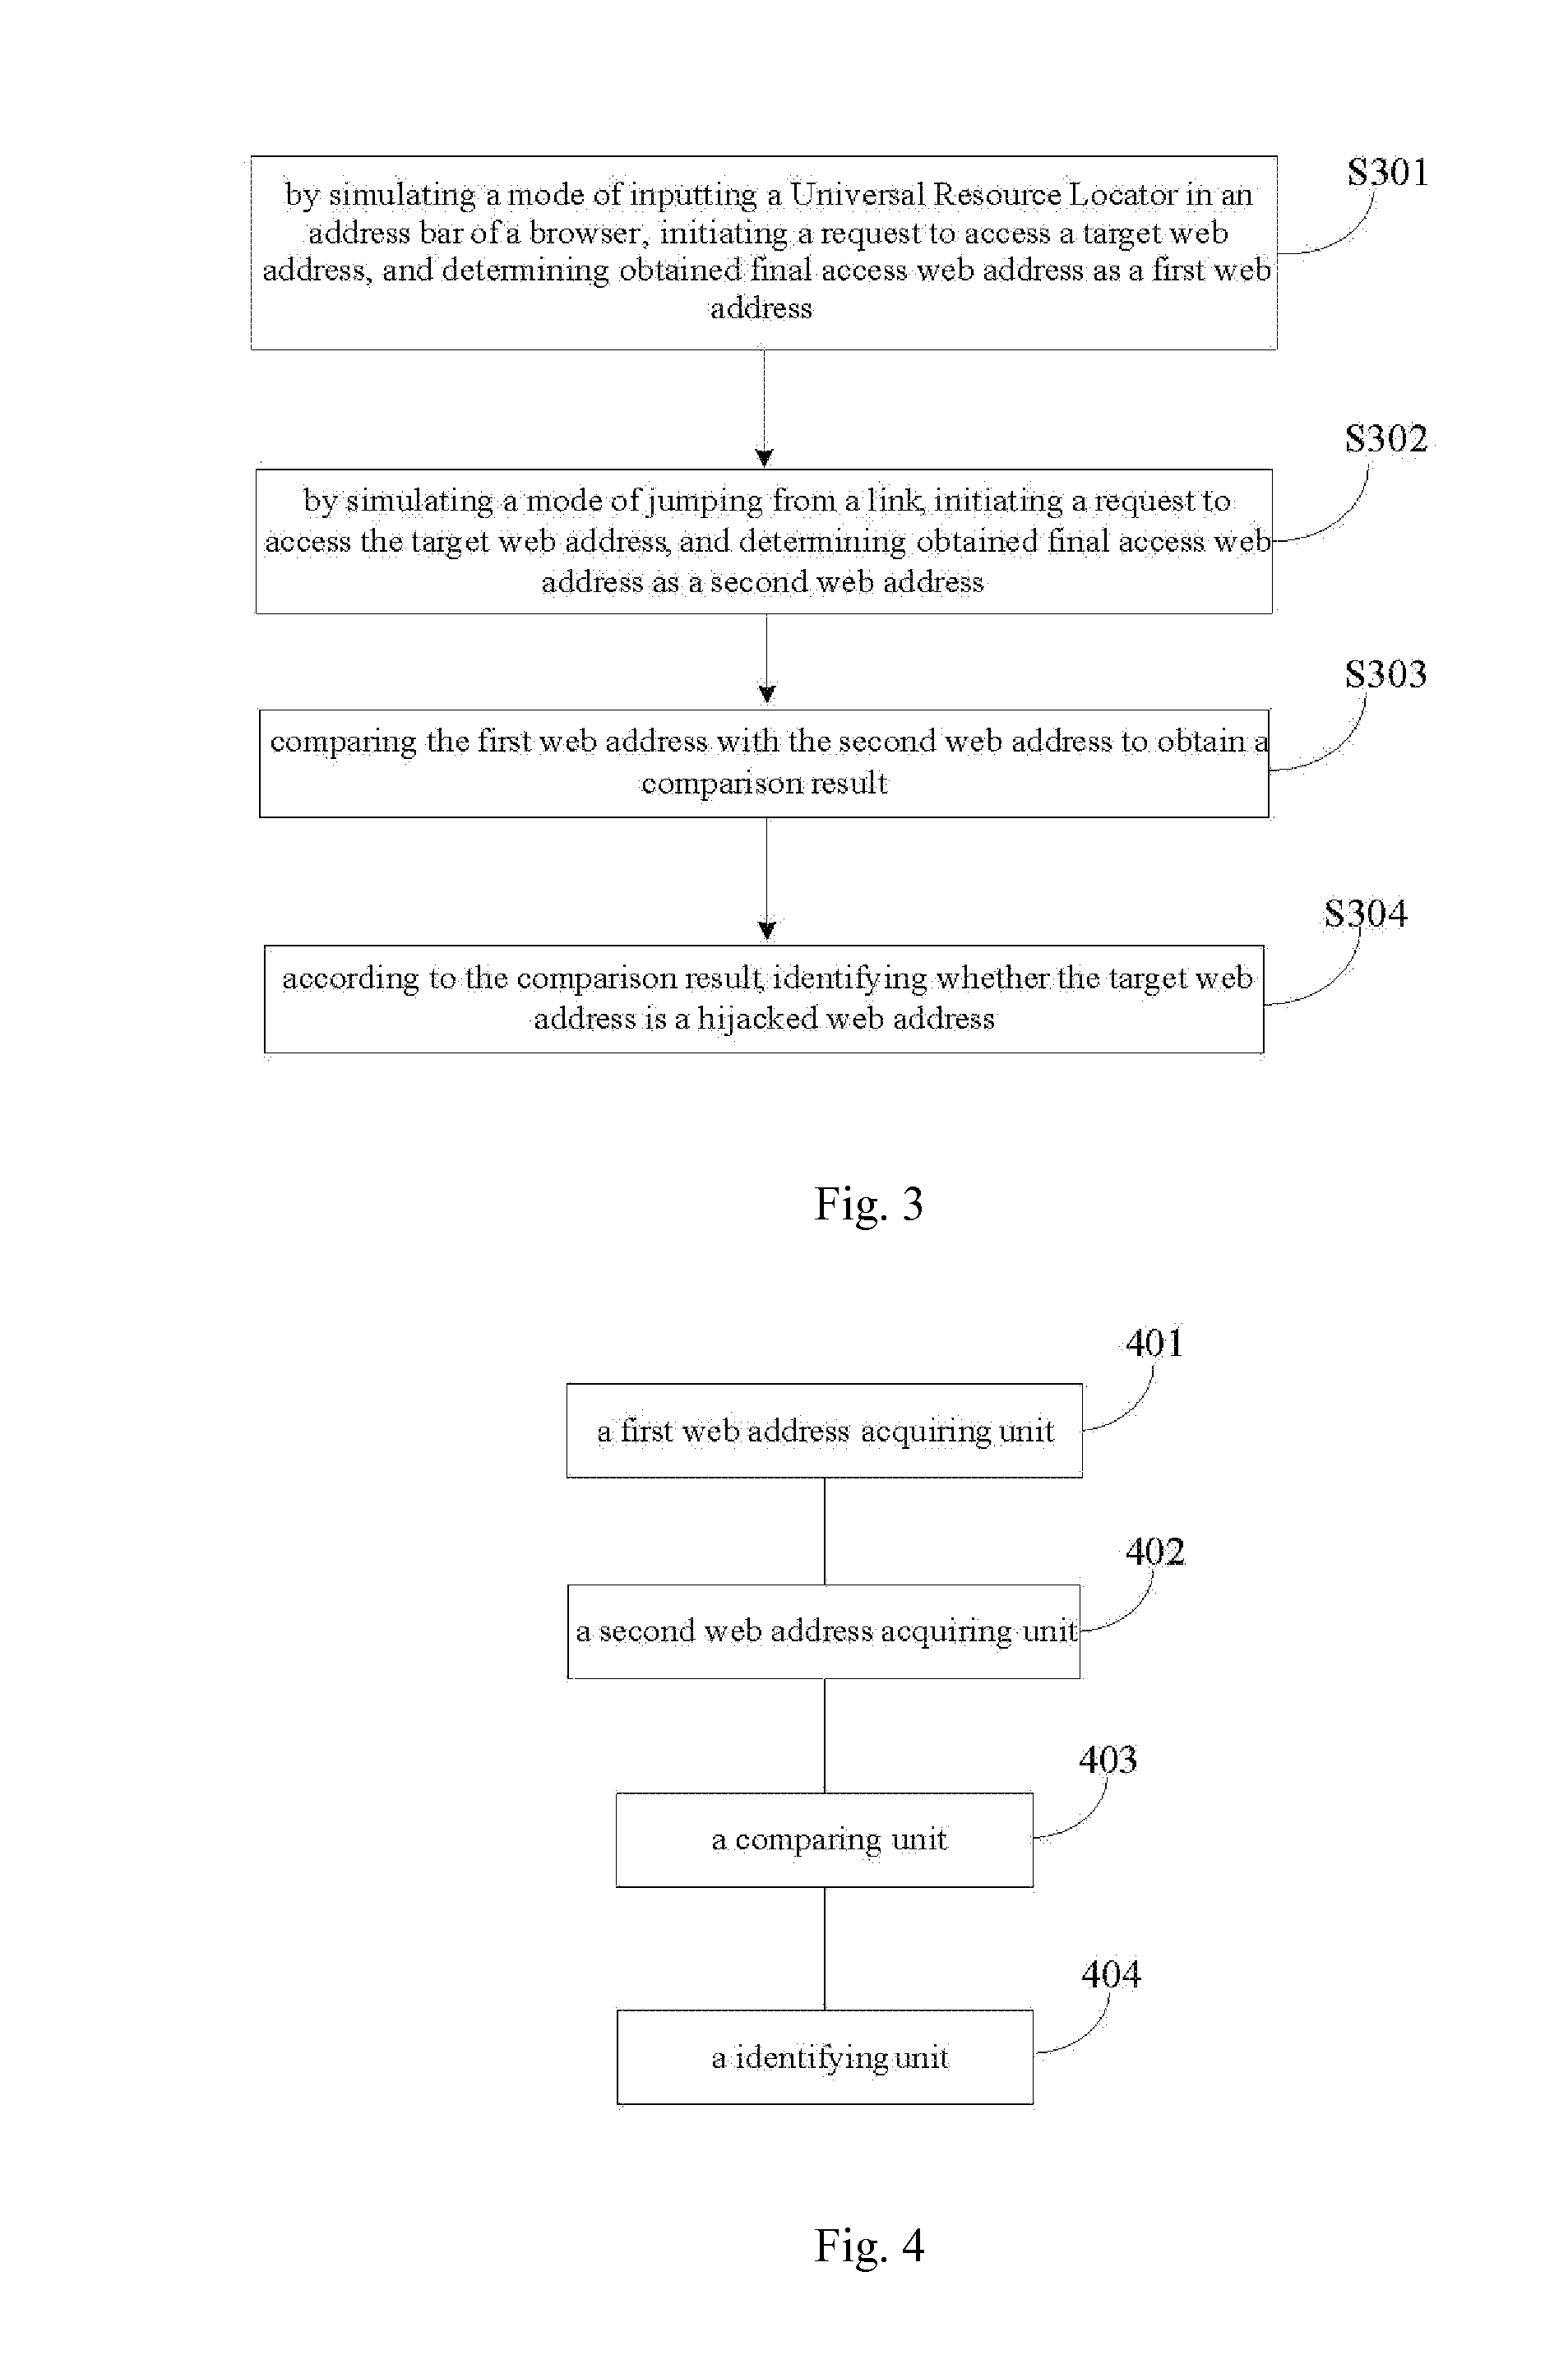 Methods and devices for identifying tampered webpage and inentifying hijacked web address